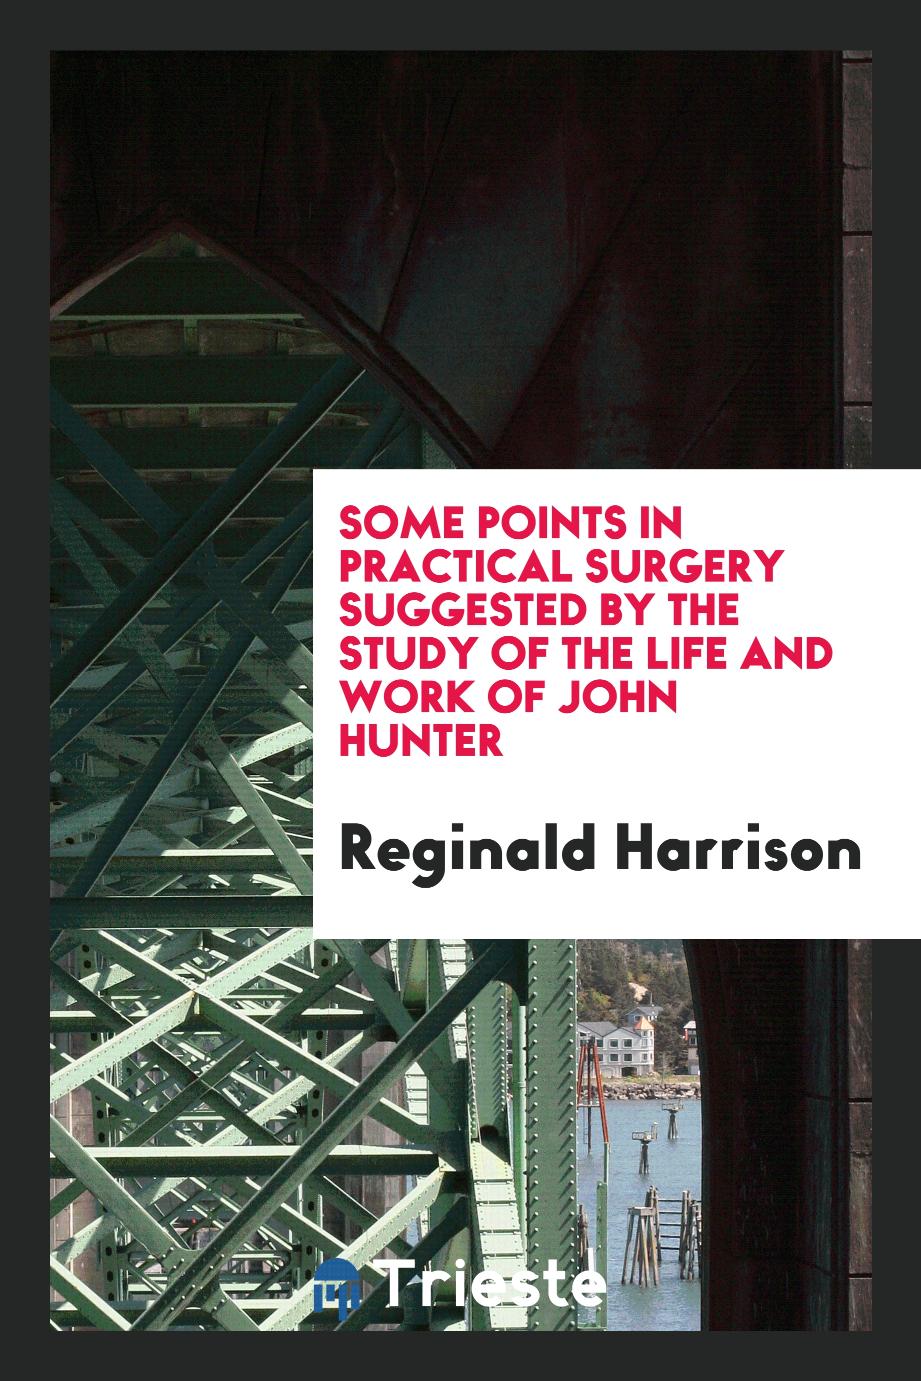 Some points in practical surgery suggested by the study of the life and work of John Hunter